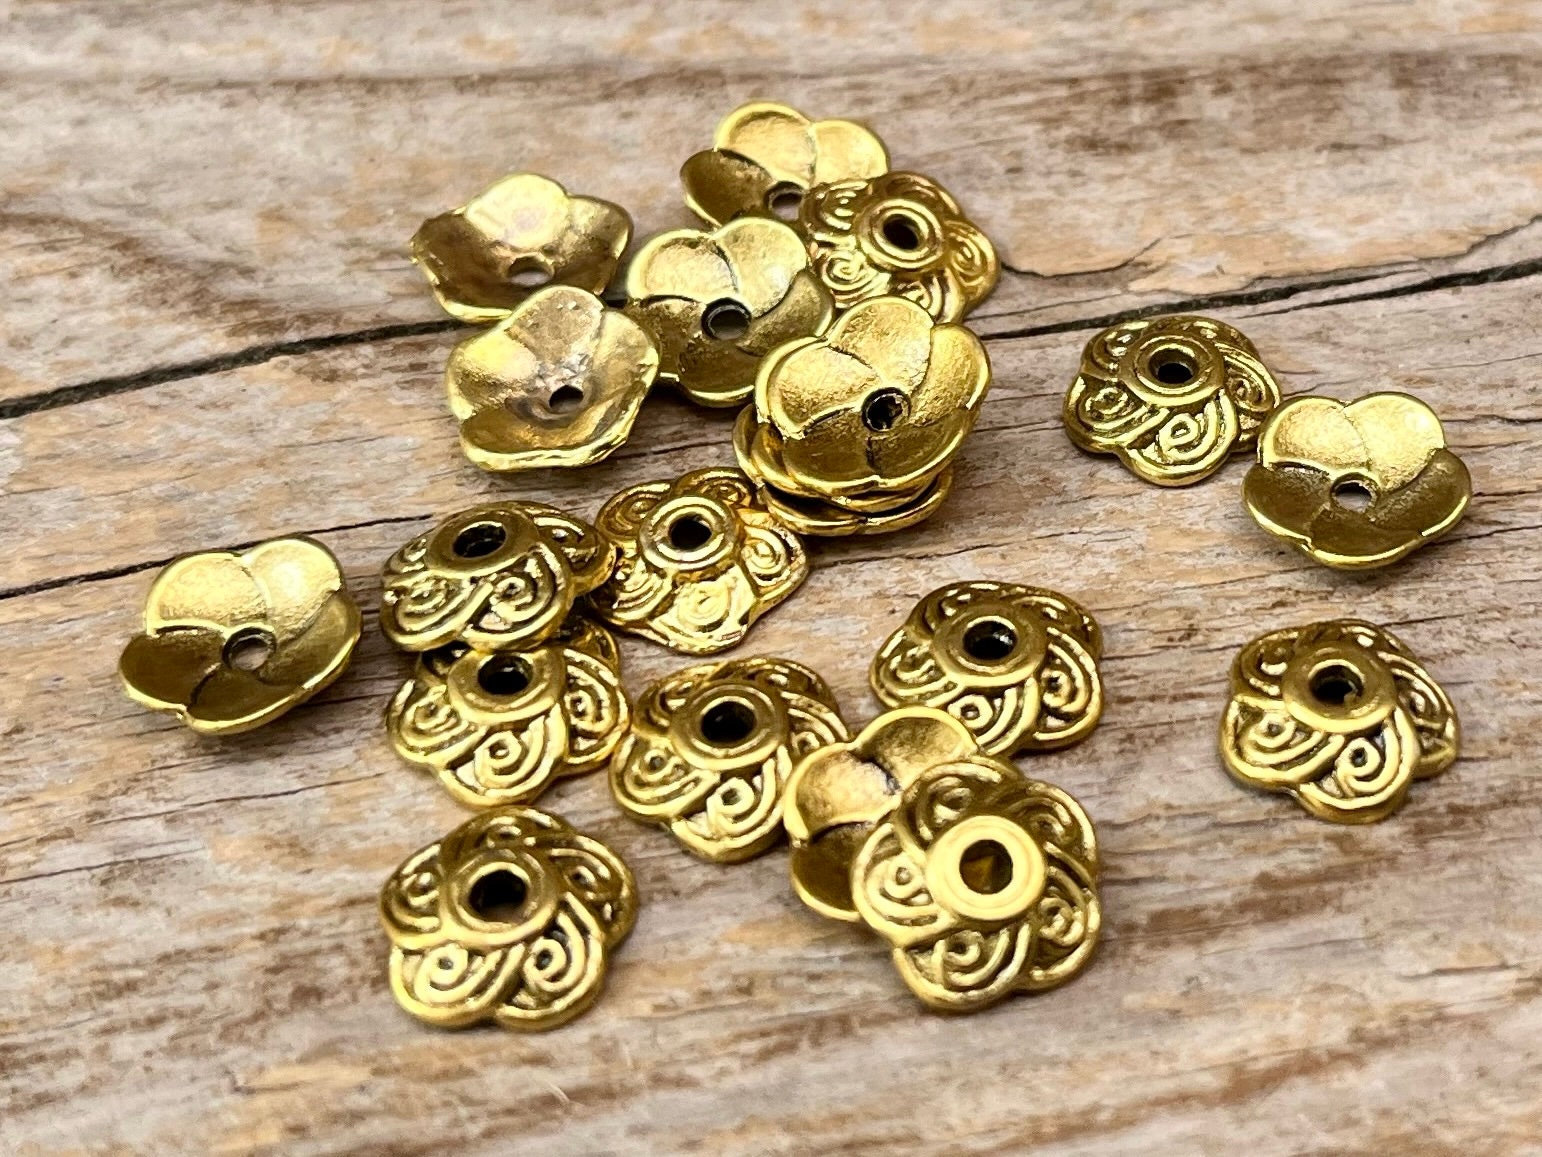 100 Pack 10mm Alloy Metal Bead Caps, Floral Design, Mixed Color, Flower Bead  Caps, Jewelry Making Bead Accents, For Round Beads, 2mm Hole